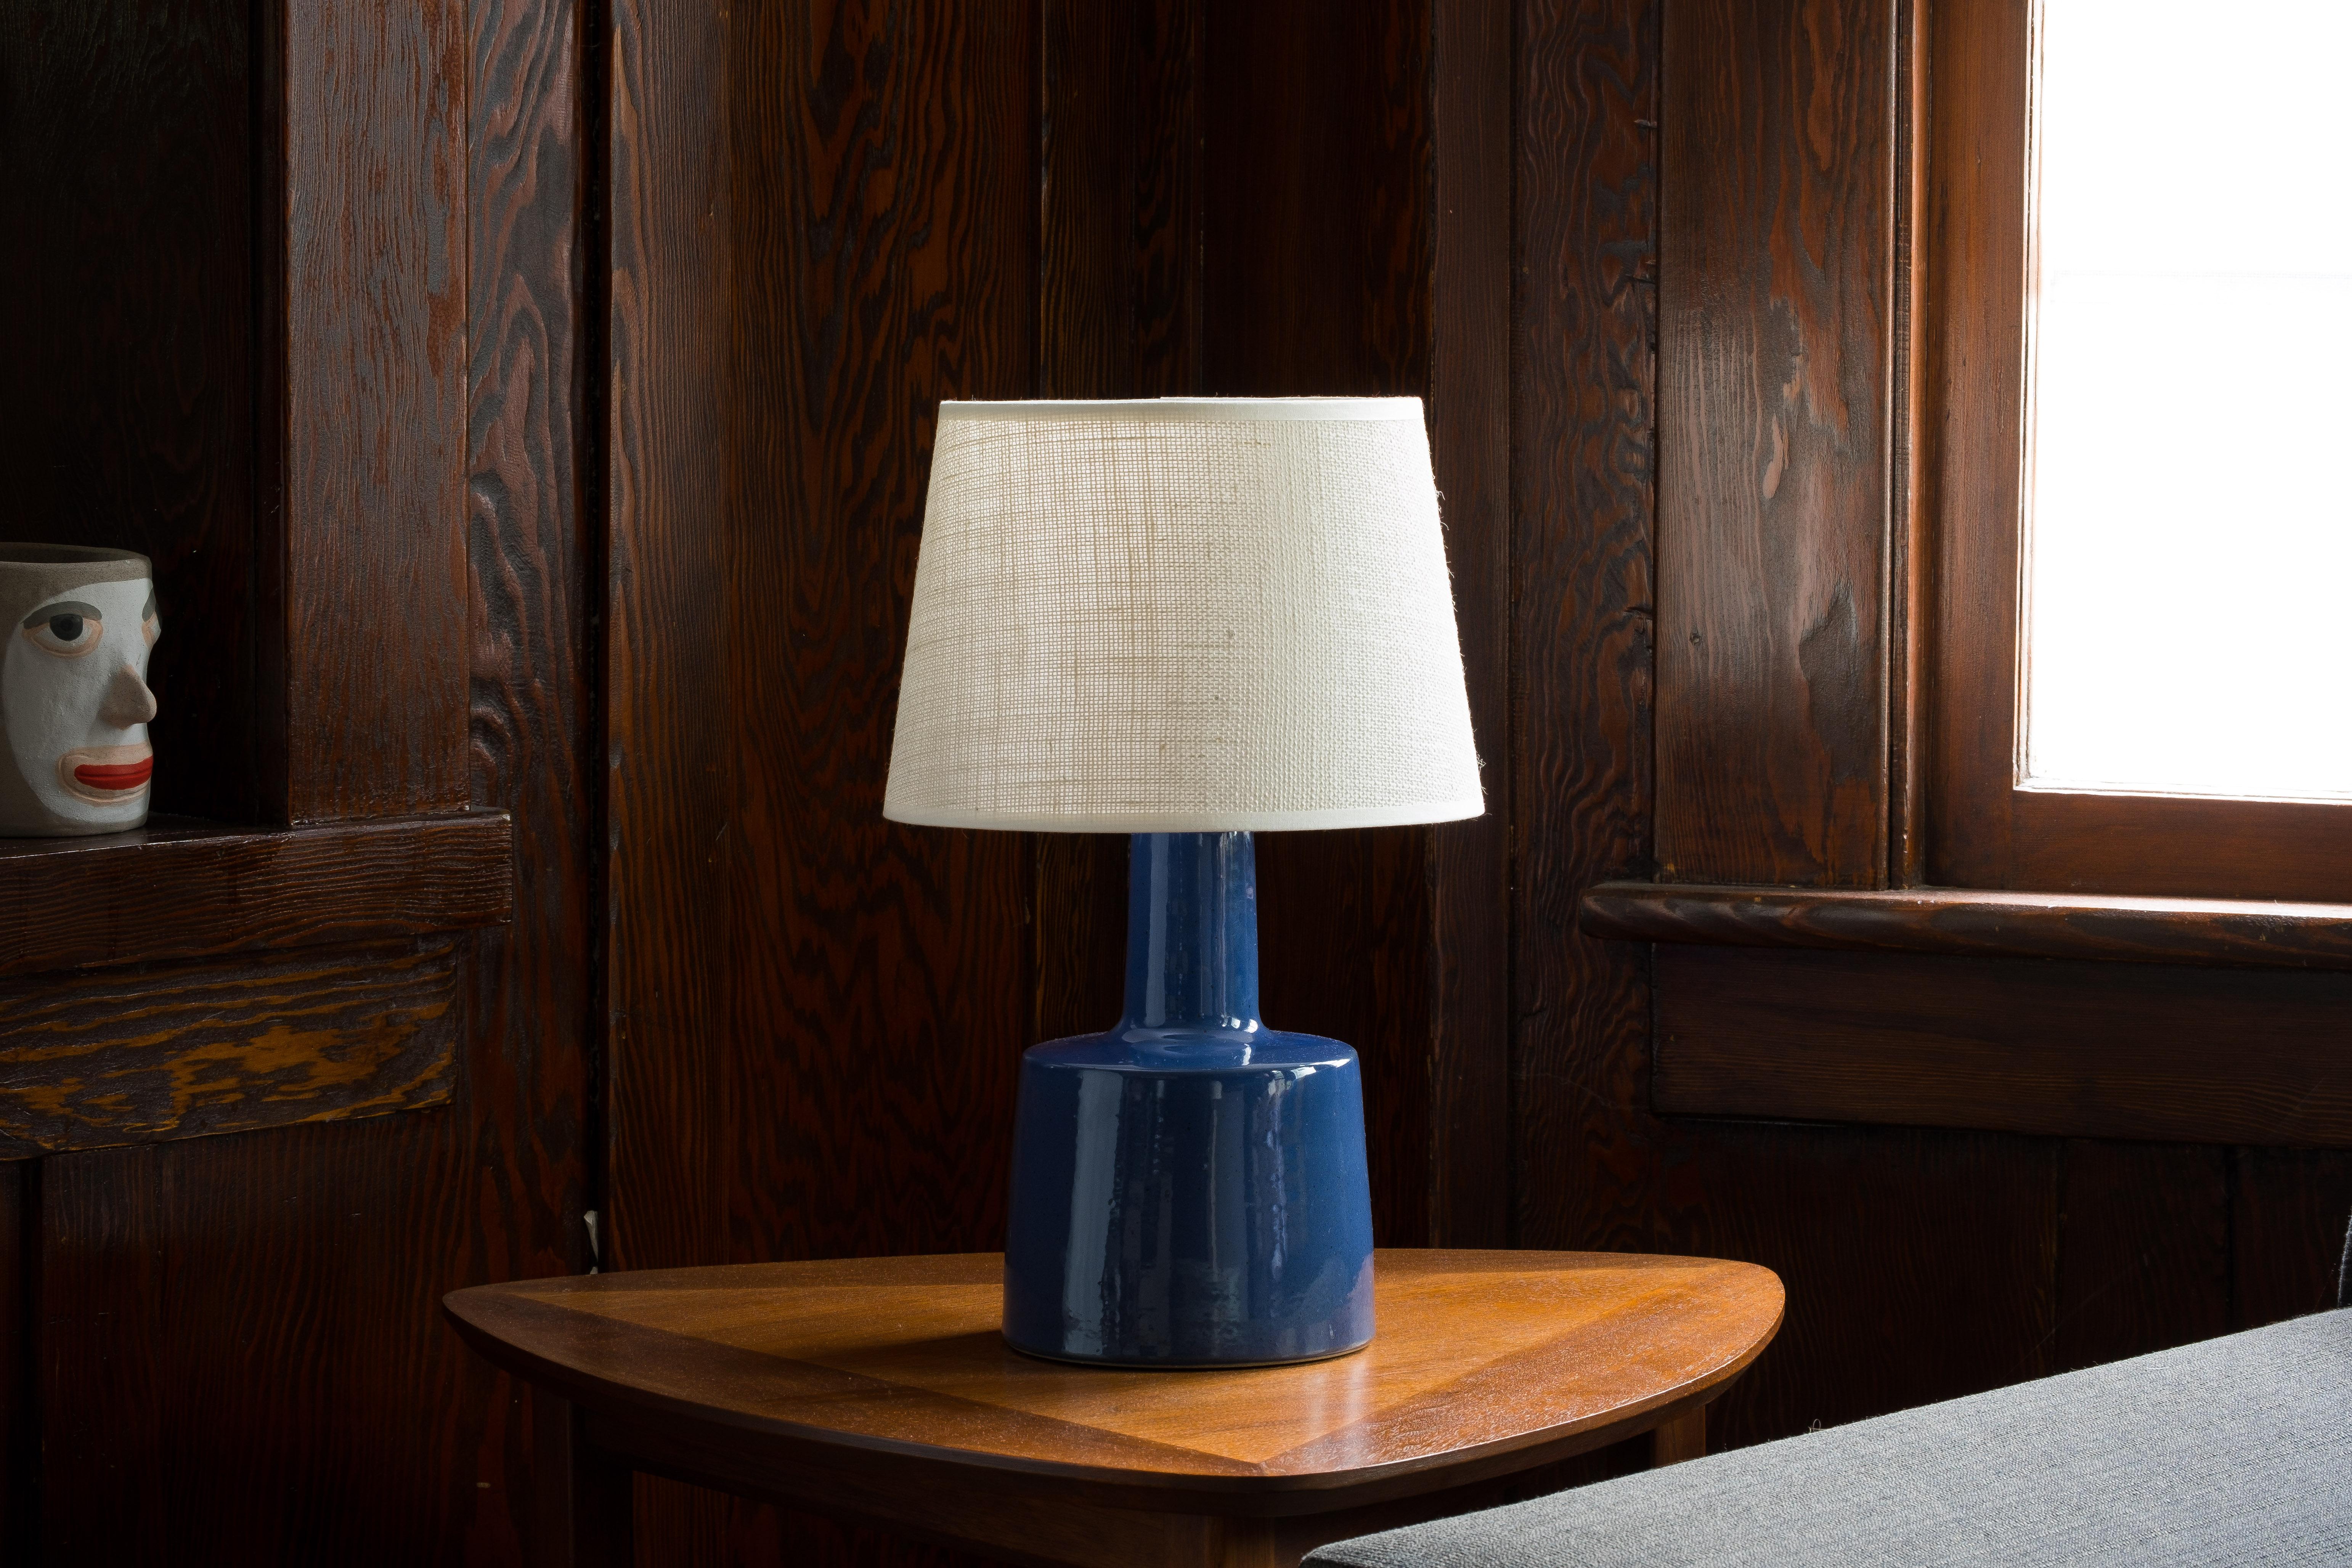 What is it?
—
Another gem from the masters of mid century lightning – Gordon and Jane Martz.

This signed Martz model 105 lamp comes in a glossy dark sapphire blue glaze with tiny flecks and specks of darker colors.

This is a beautiful piece that